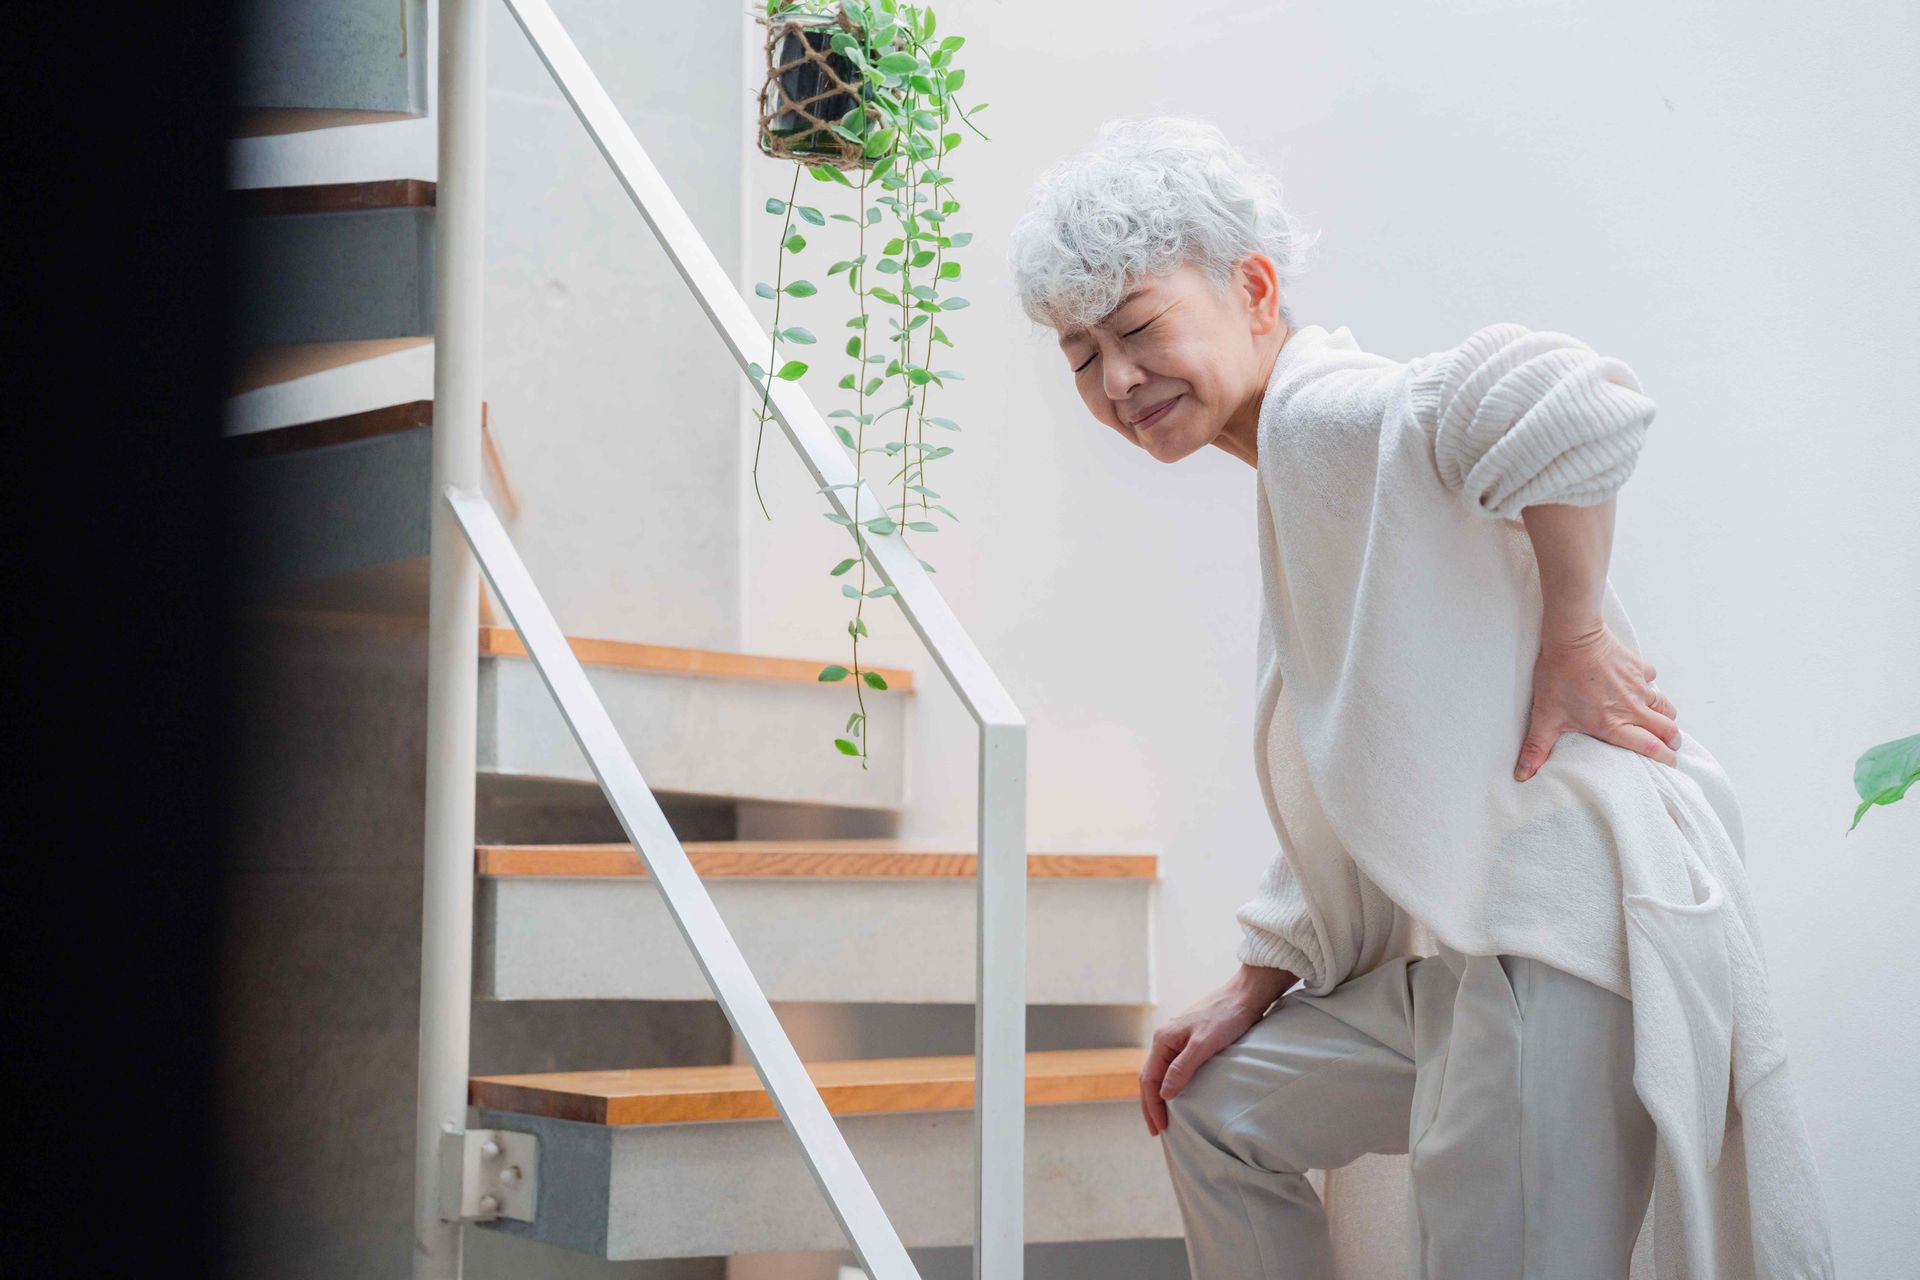 An elderly woman is struggling to walk up the stairs without pain.